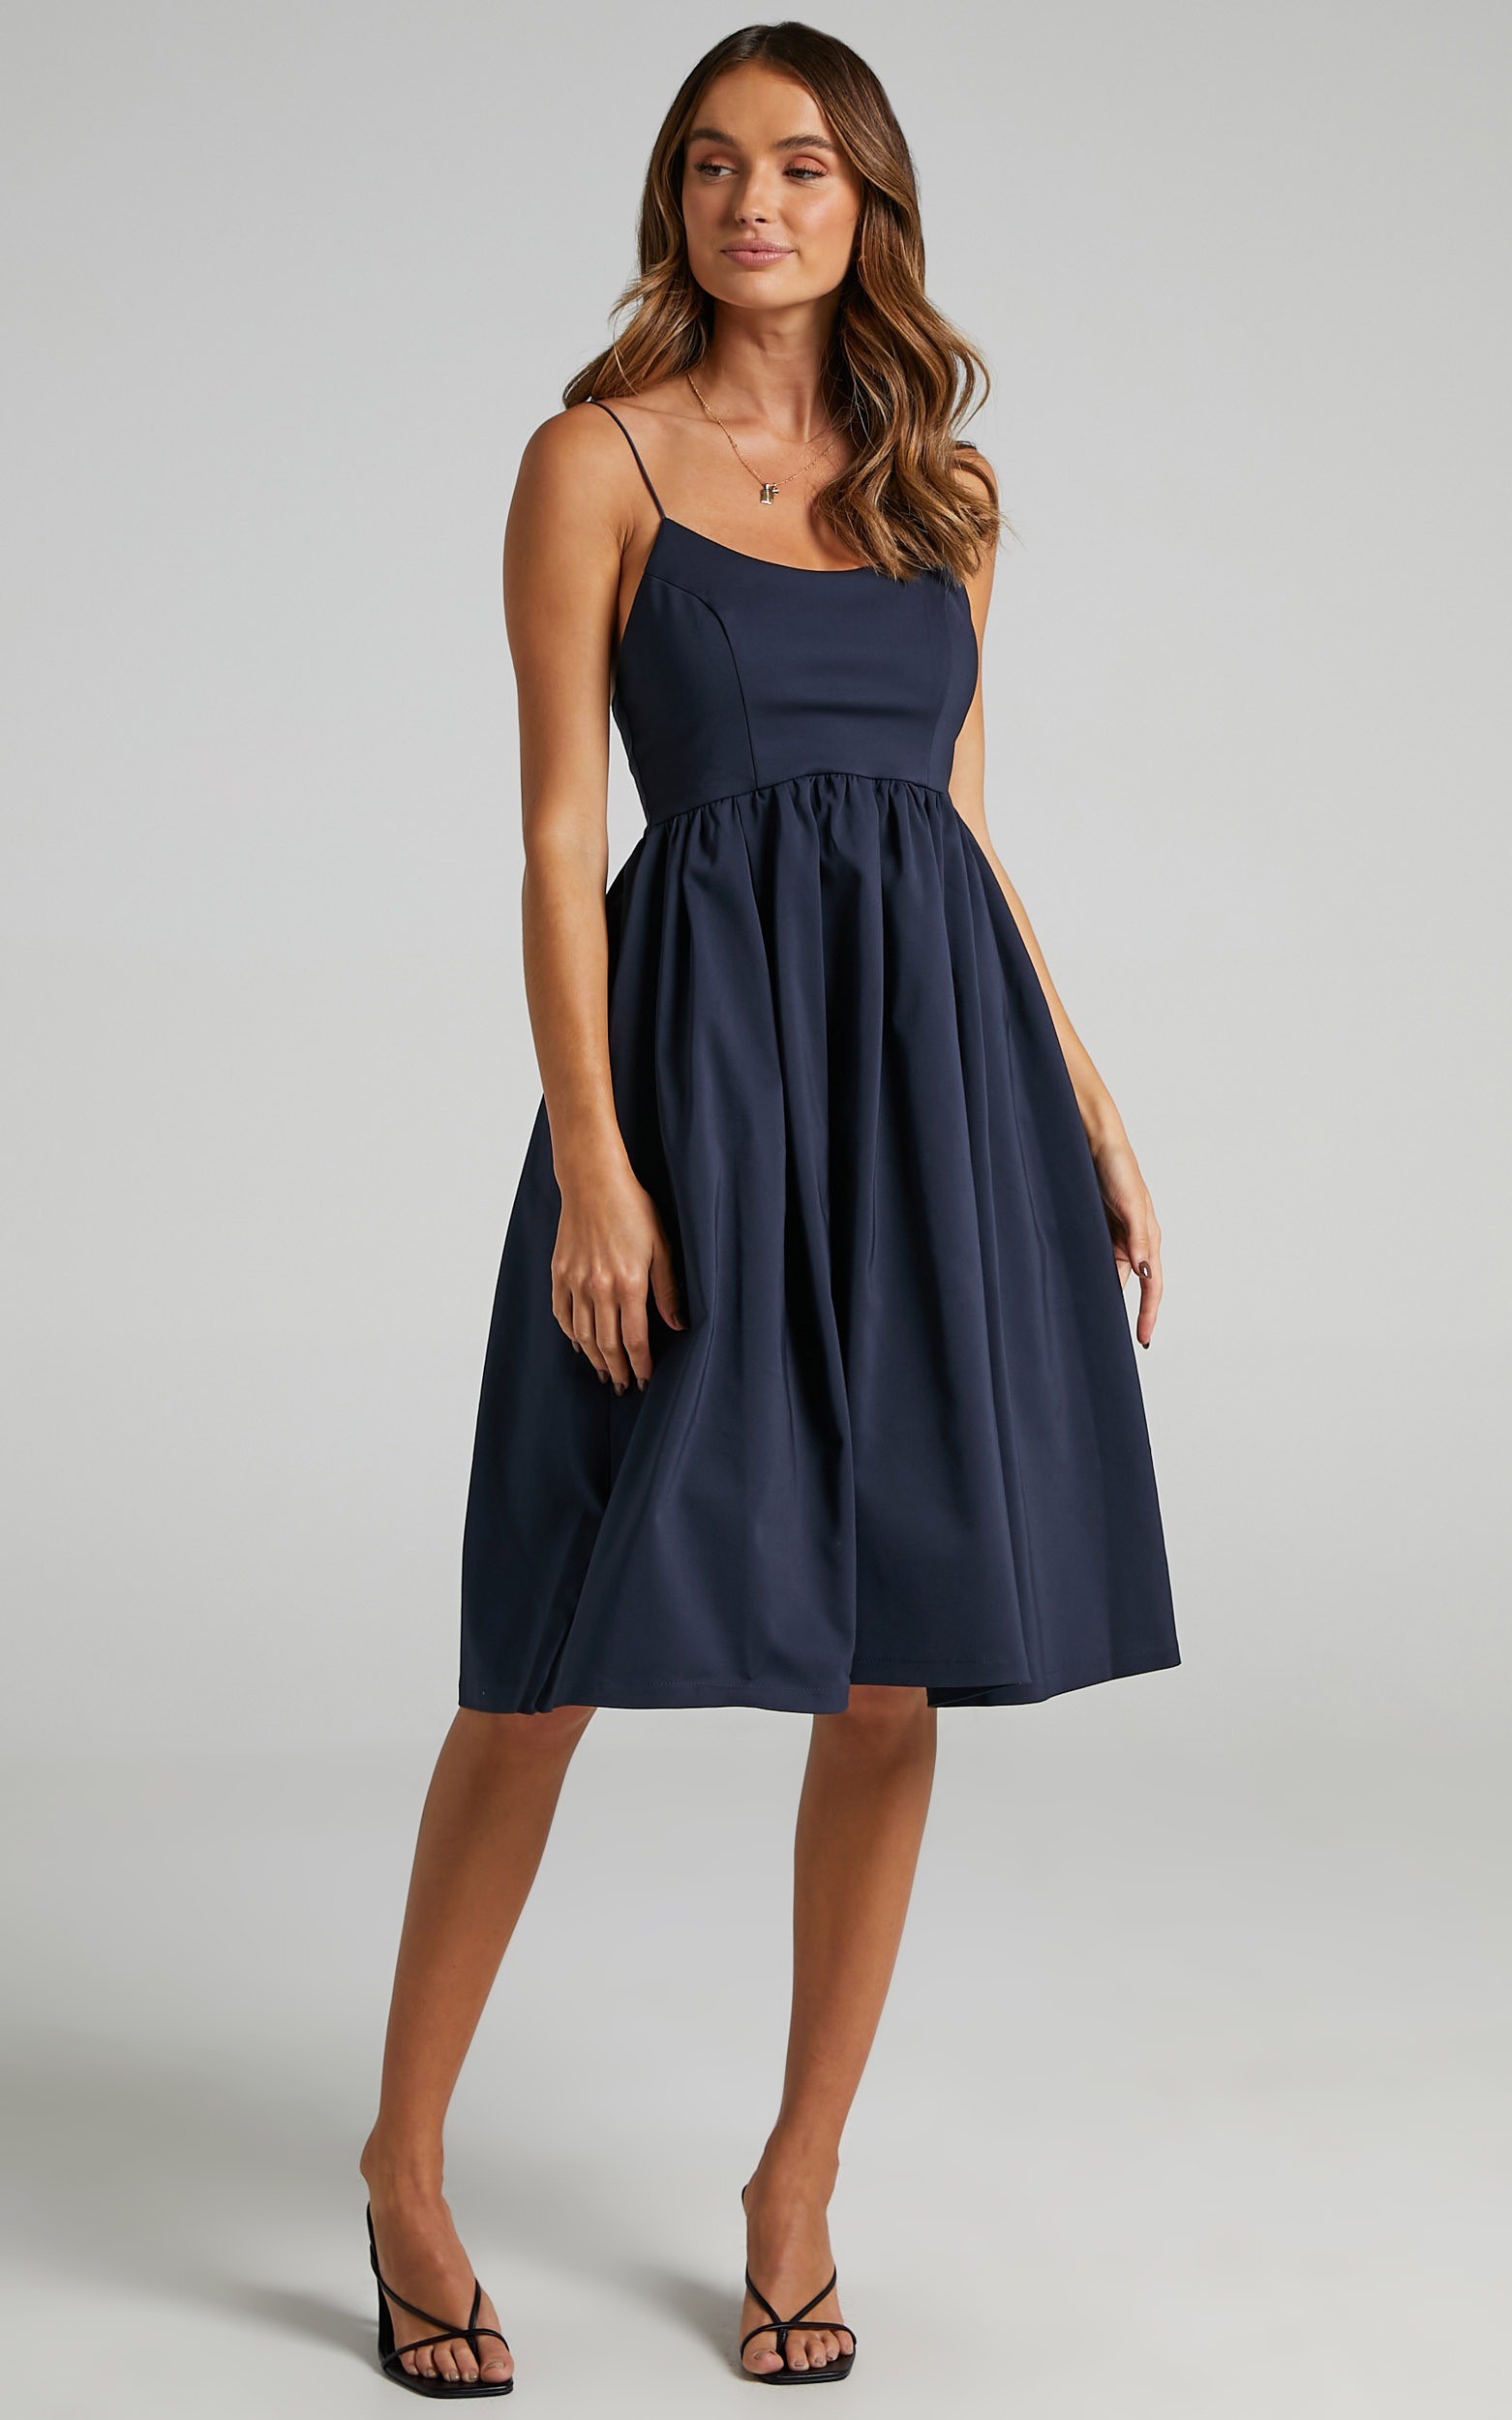 Wild Nights A-line Spaghetti Strap Dress in Navy - 06, NVY3, hi-res image number null